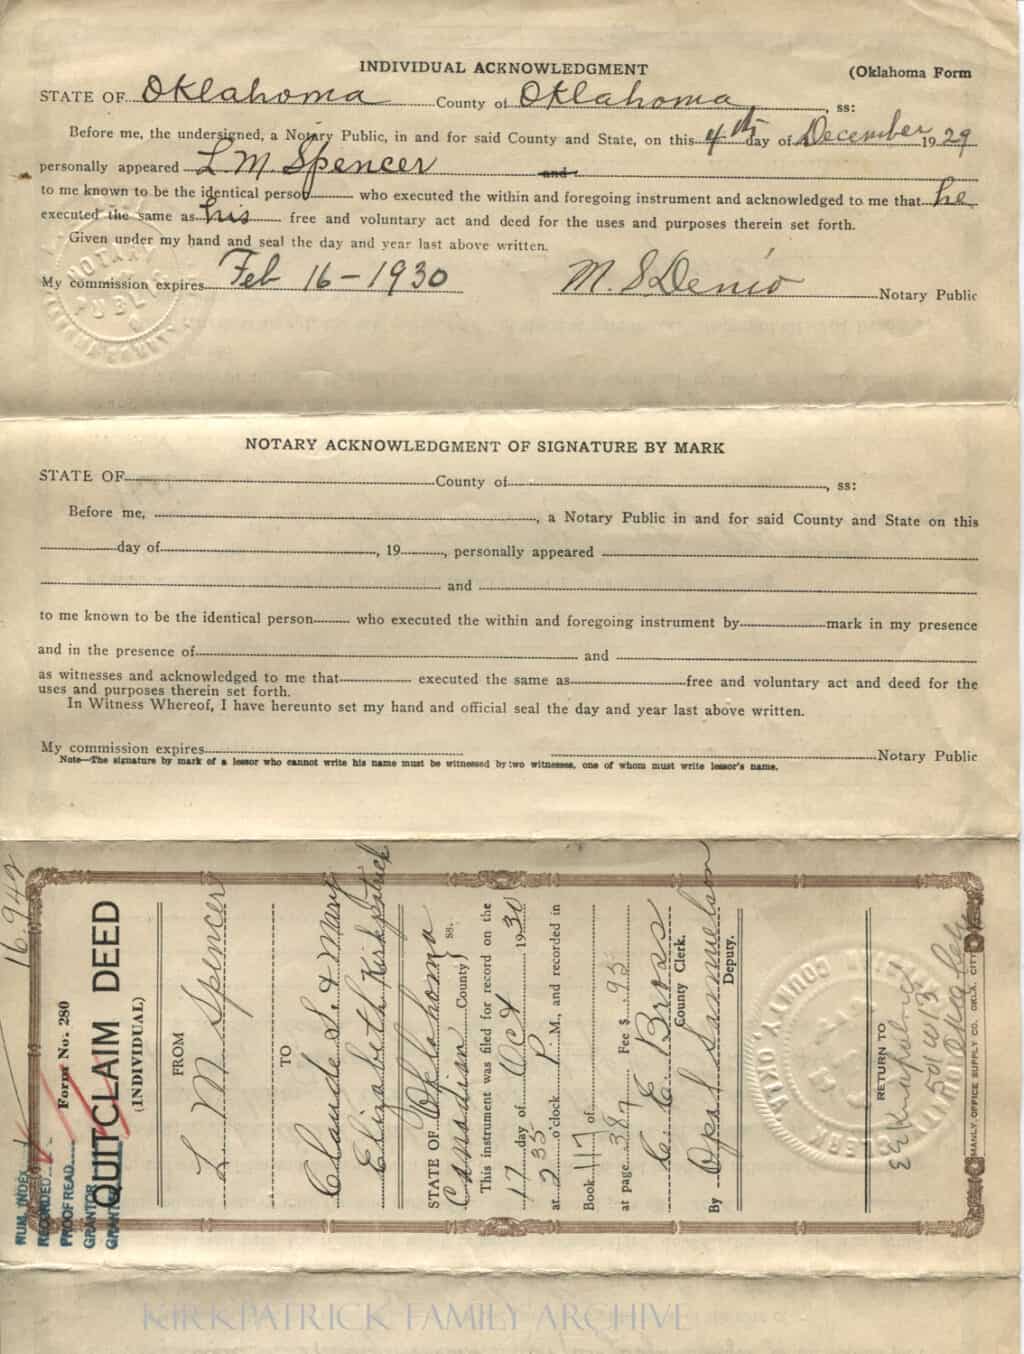 Quit Claim Deed between L. M. Spencer and Claude S. and Elizabeth Bole Kirkpatrick